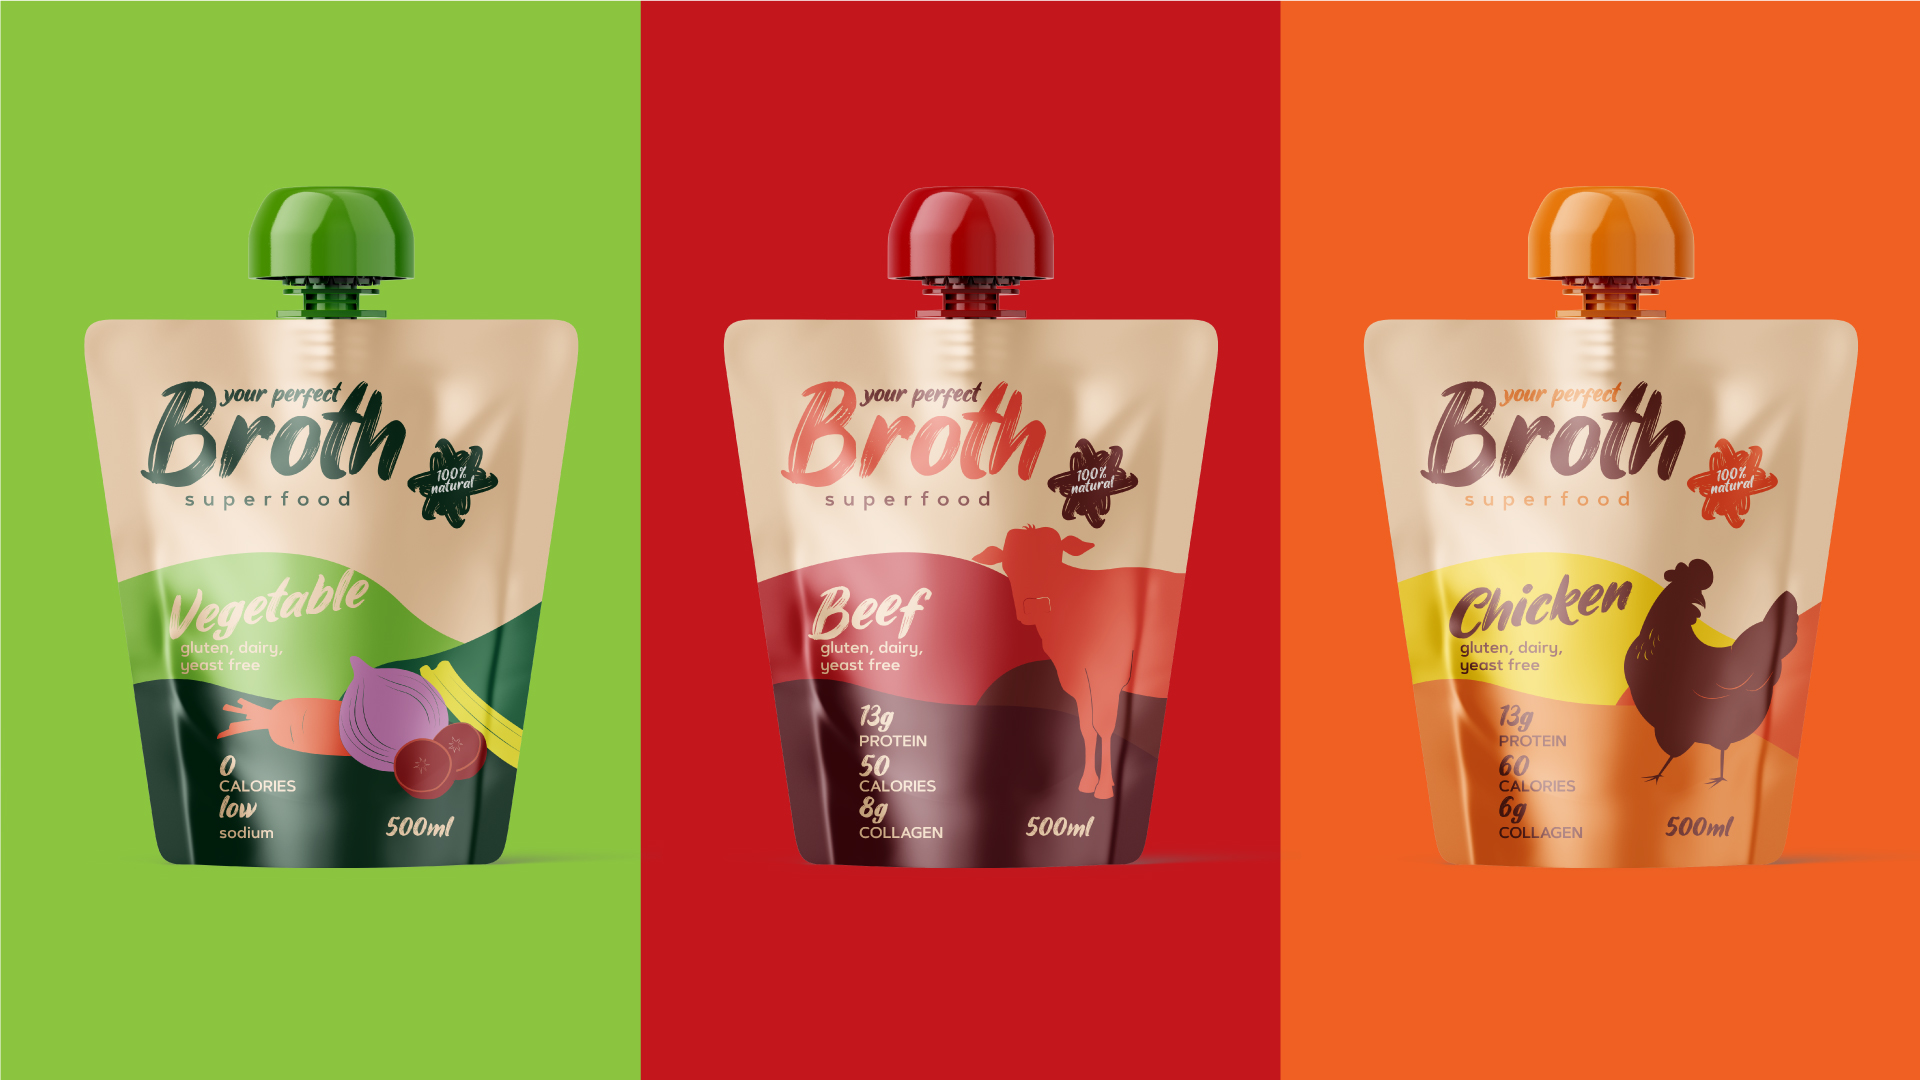 Designing a Modern Branding and Sustainable Packaging for a Line of Natural Broths